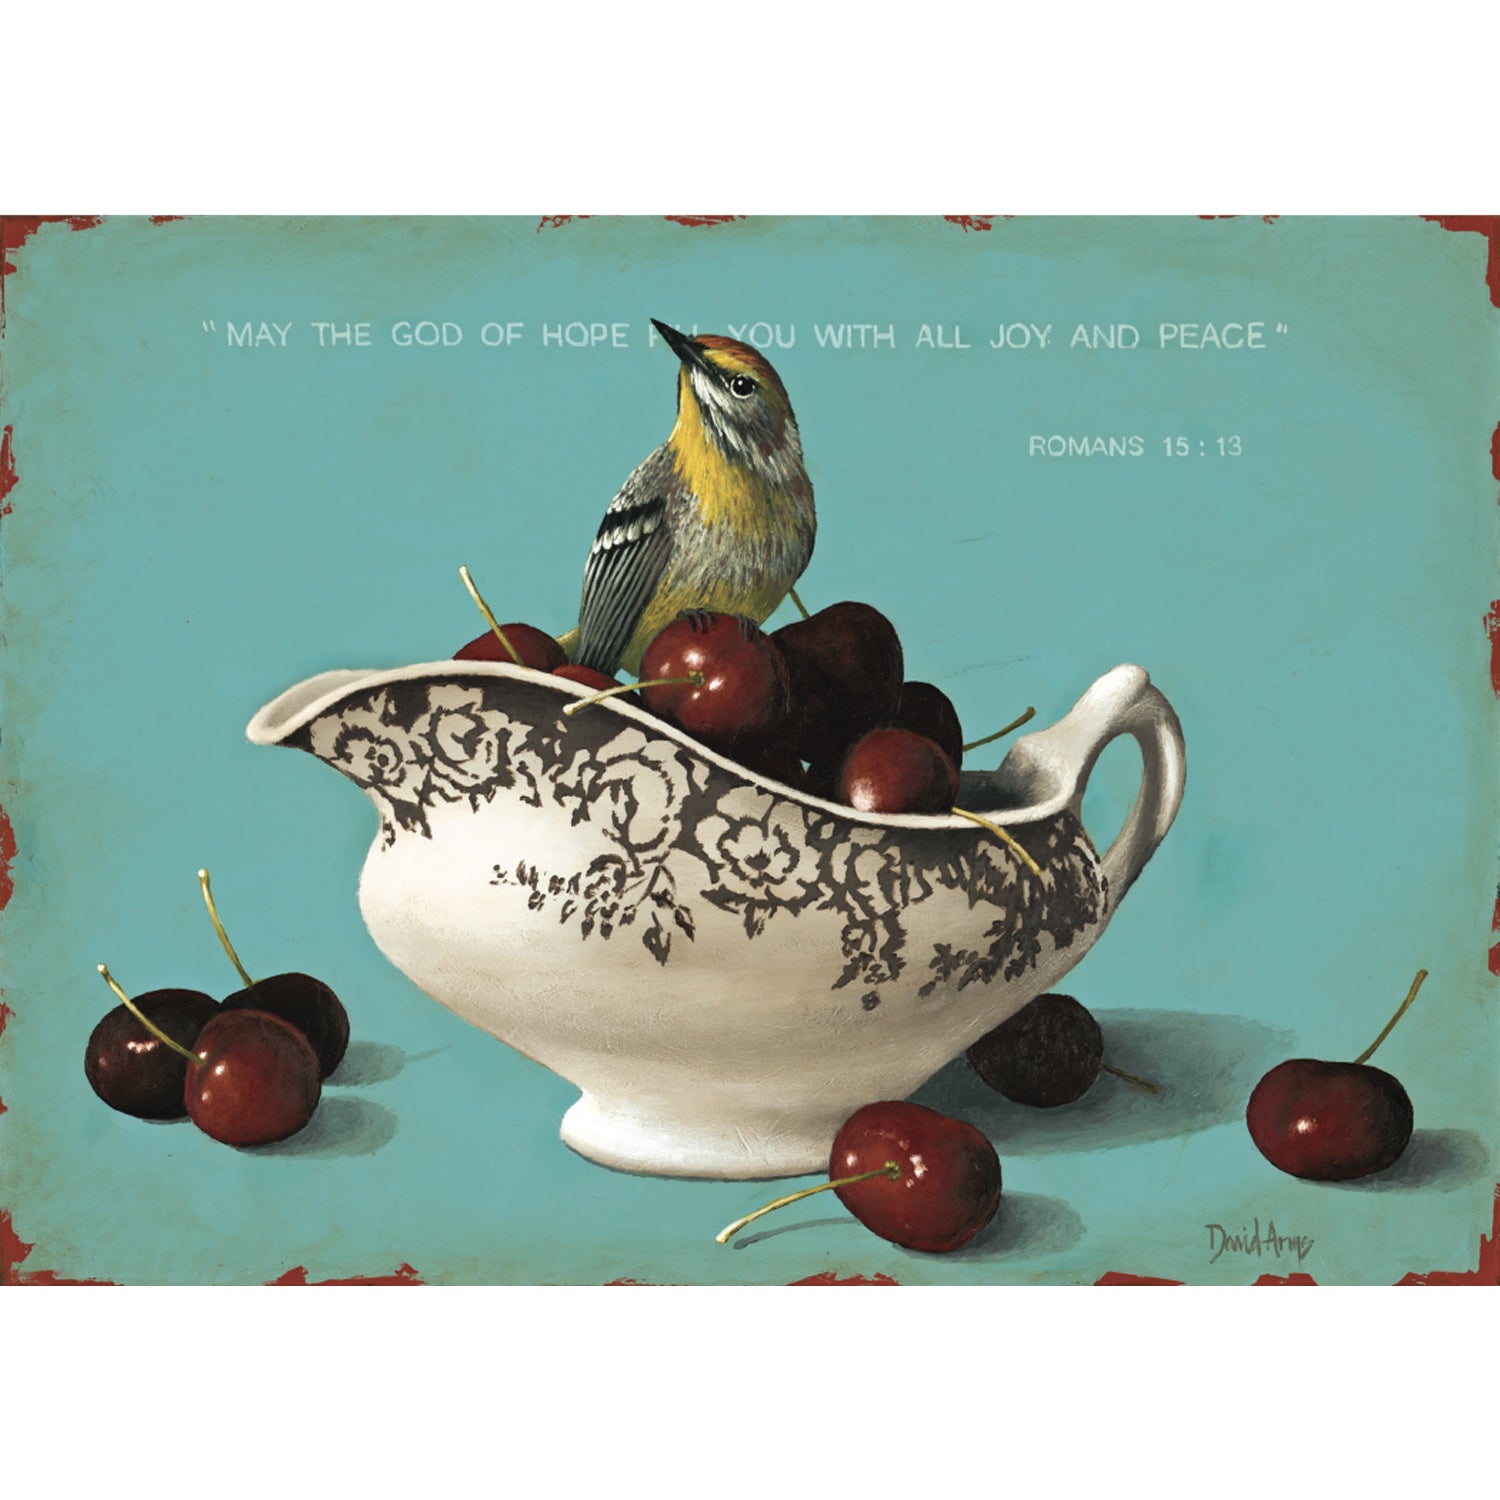 The Hester &amp; Cook God of Hope Card watches as a bird sits gracefully on top of a bowl of cherries.